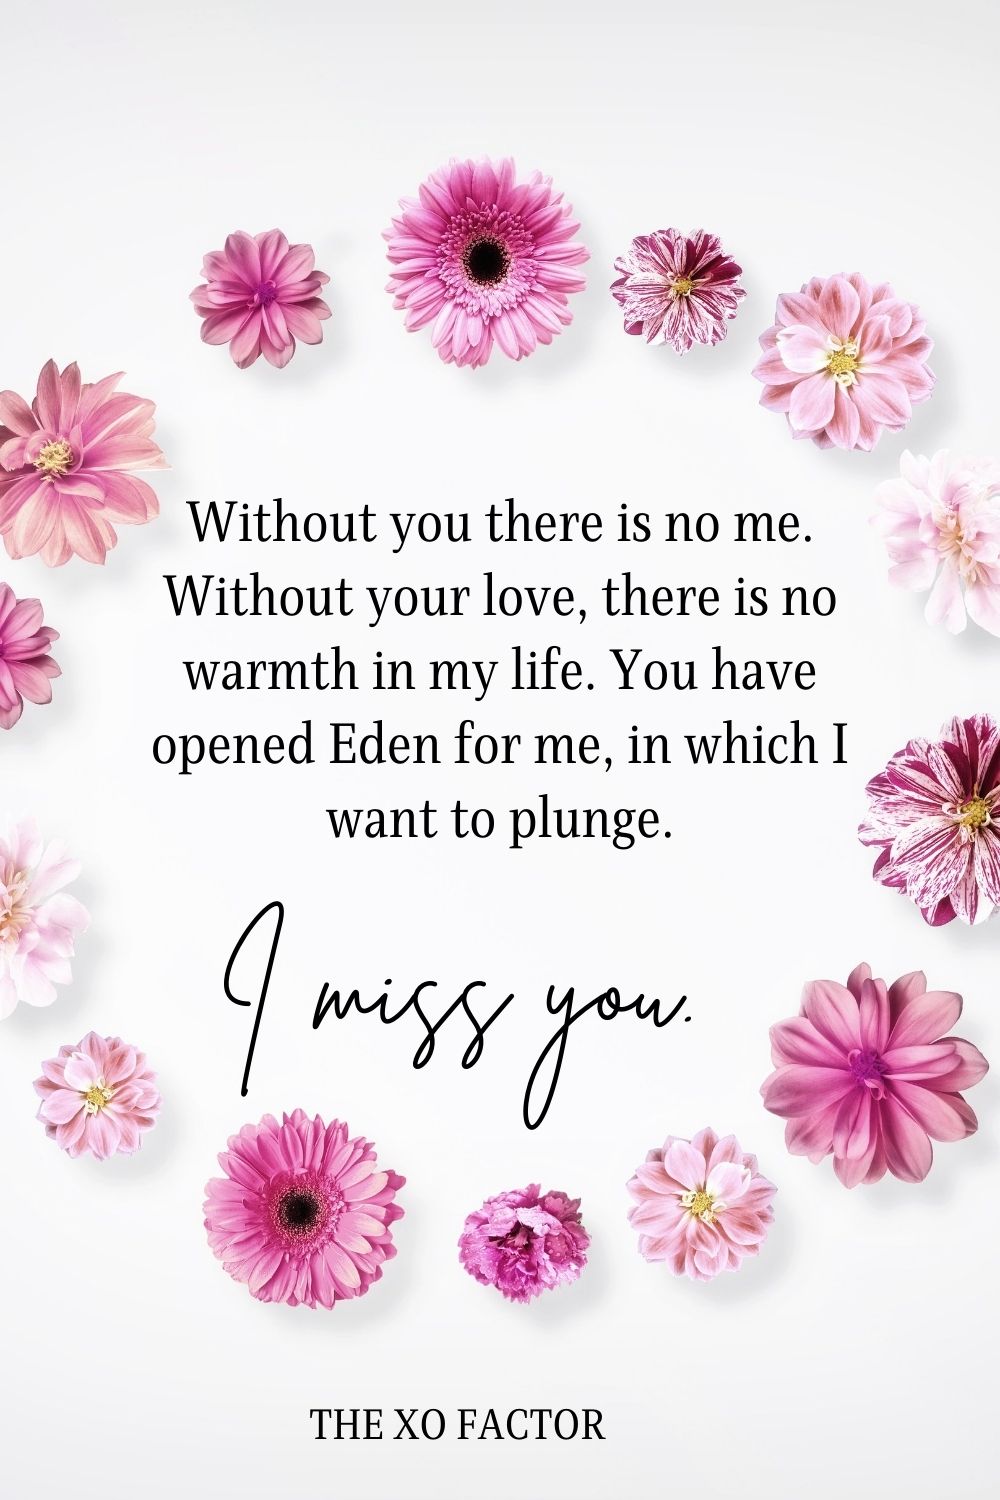 Without you there is no me. Without your love, there is no warmth in my life. You have opened Eden for me, in which I want to plunge. I miss you.